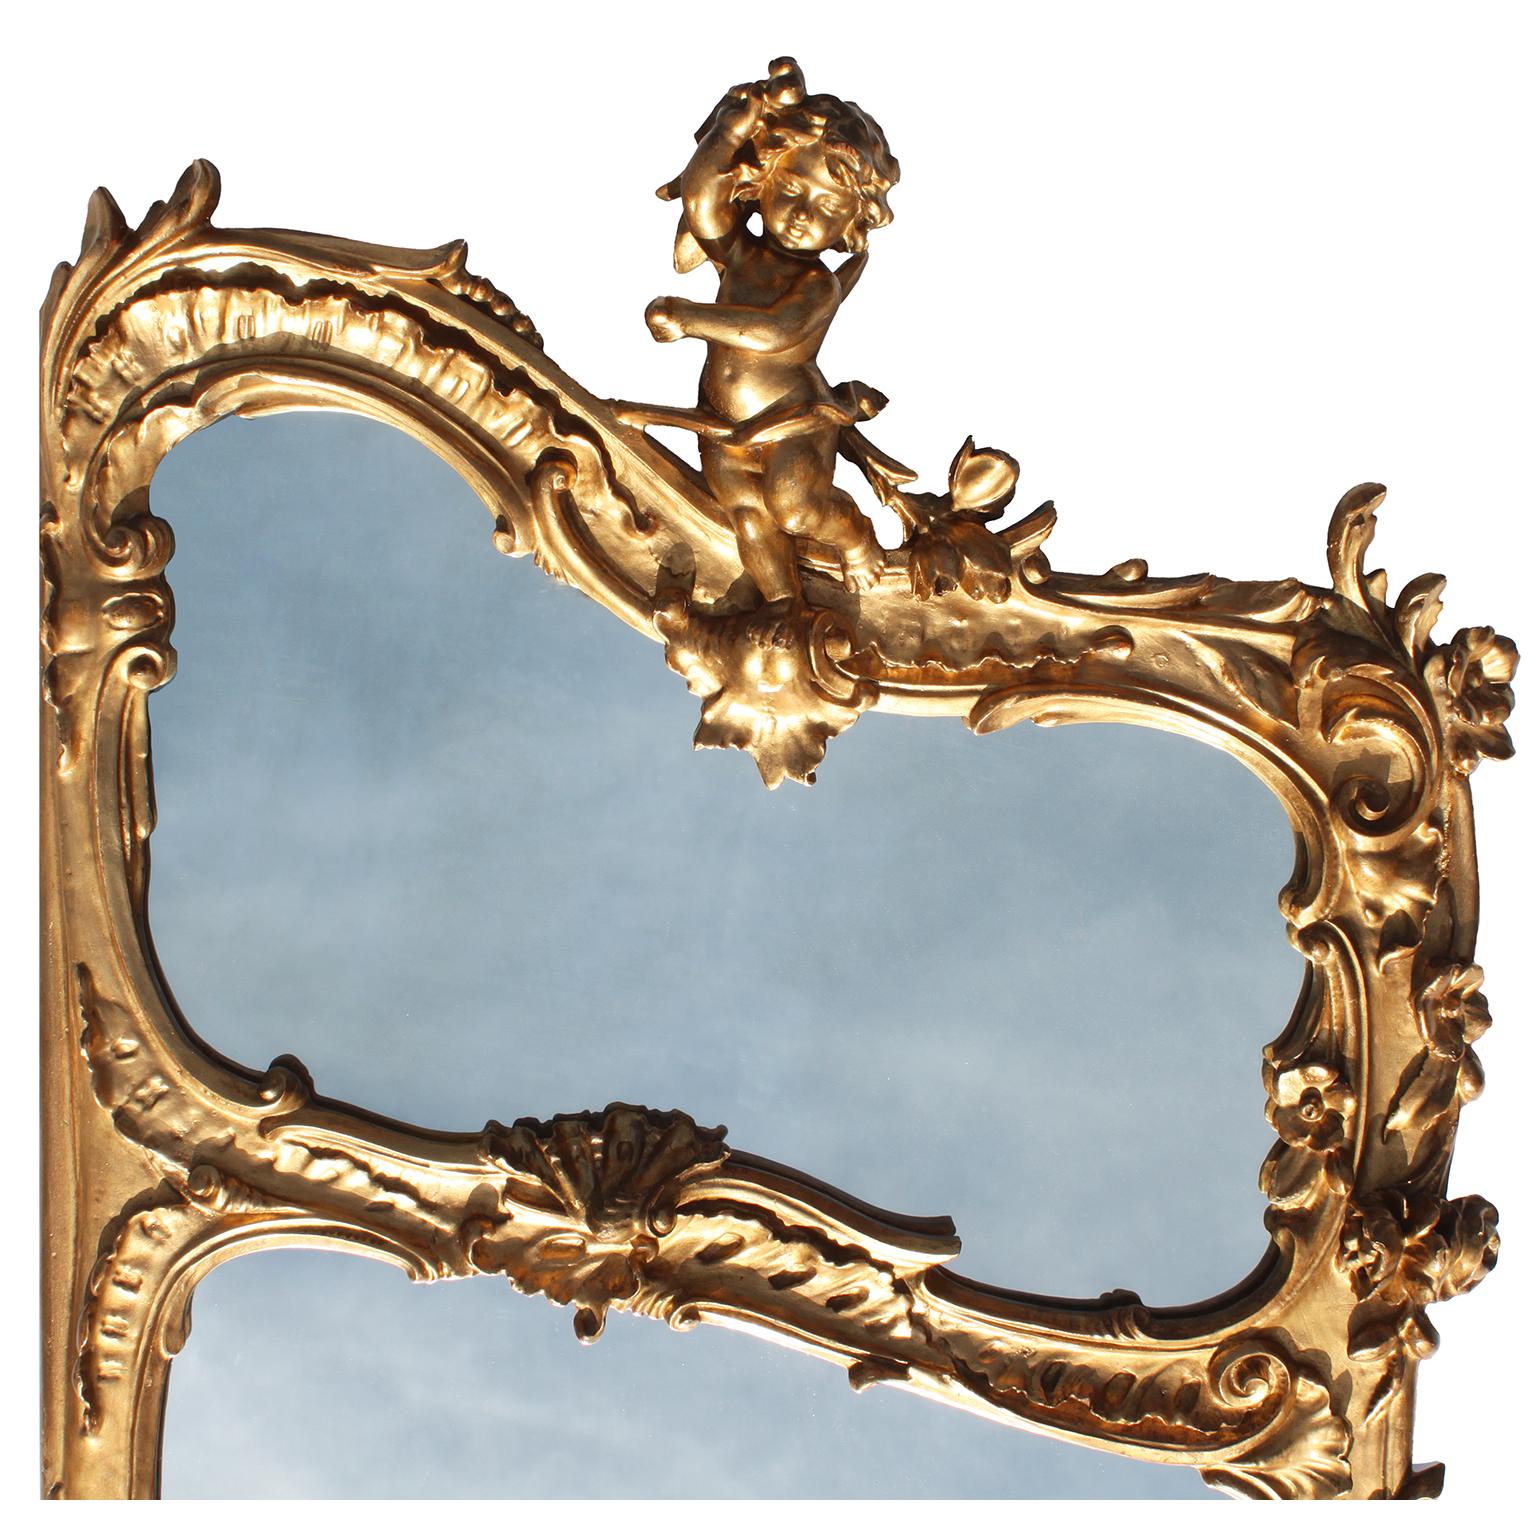 Whimsical French 19th-20th Century Belle Époque Gilt-Wood Triptych Putti Mirrors For Sale 2